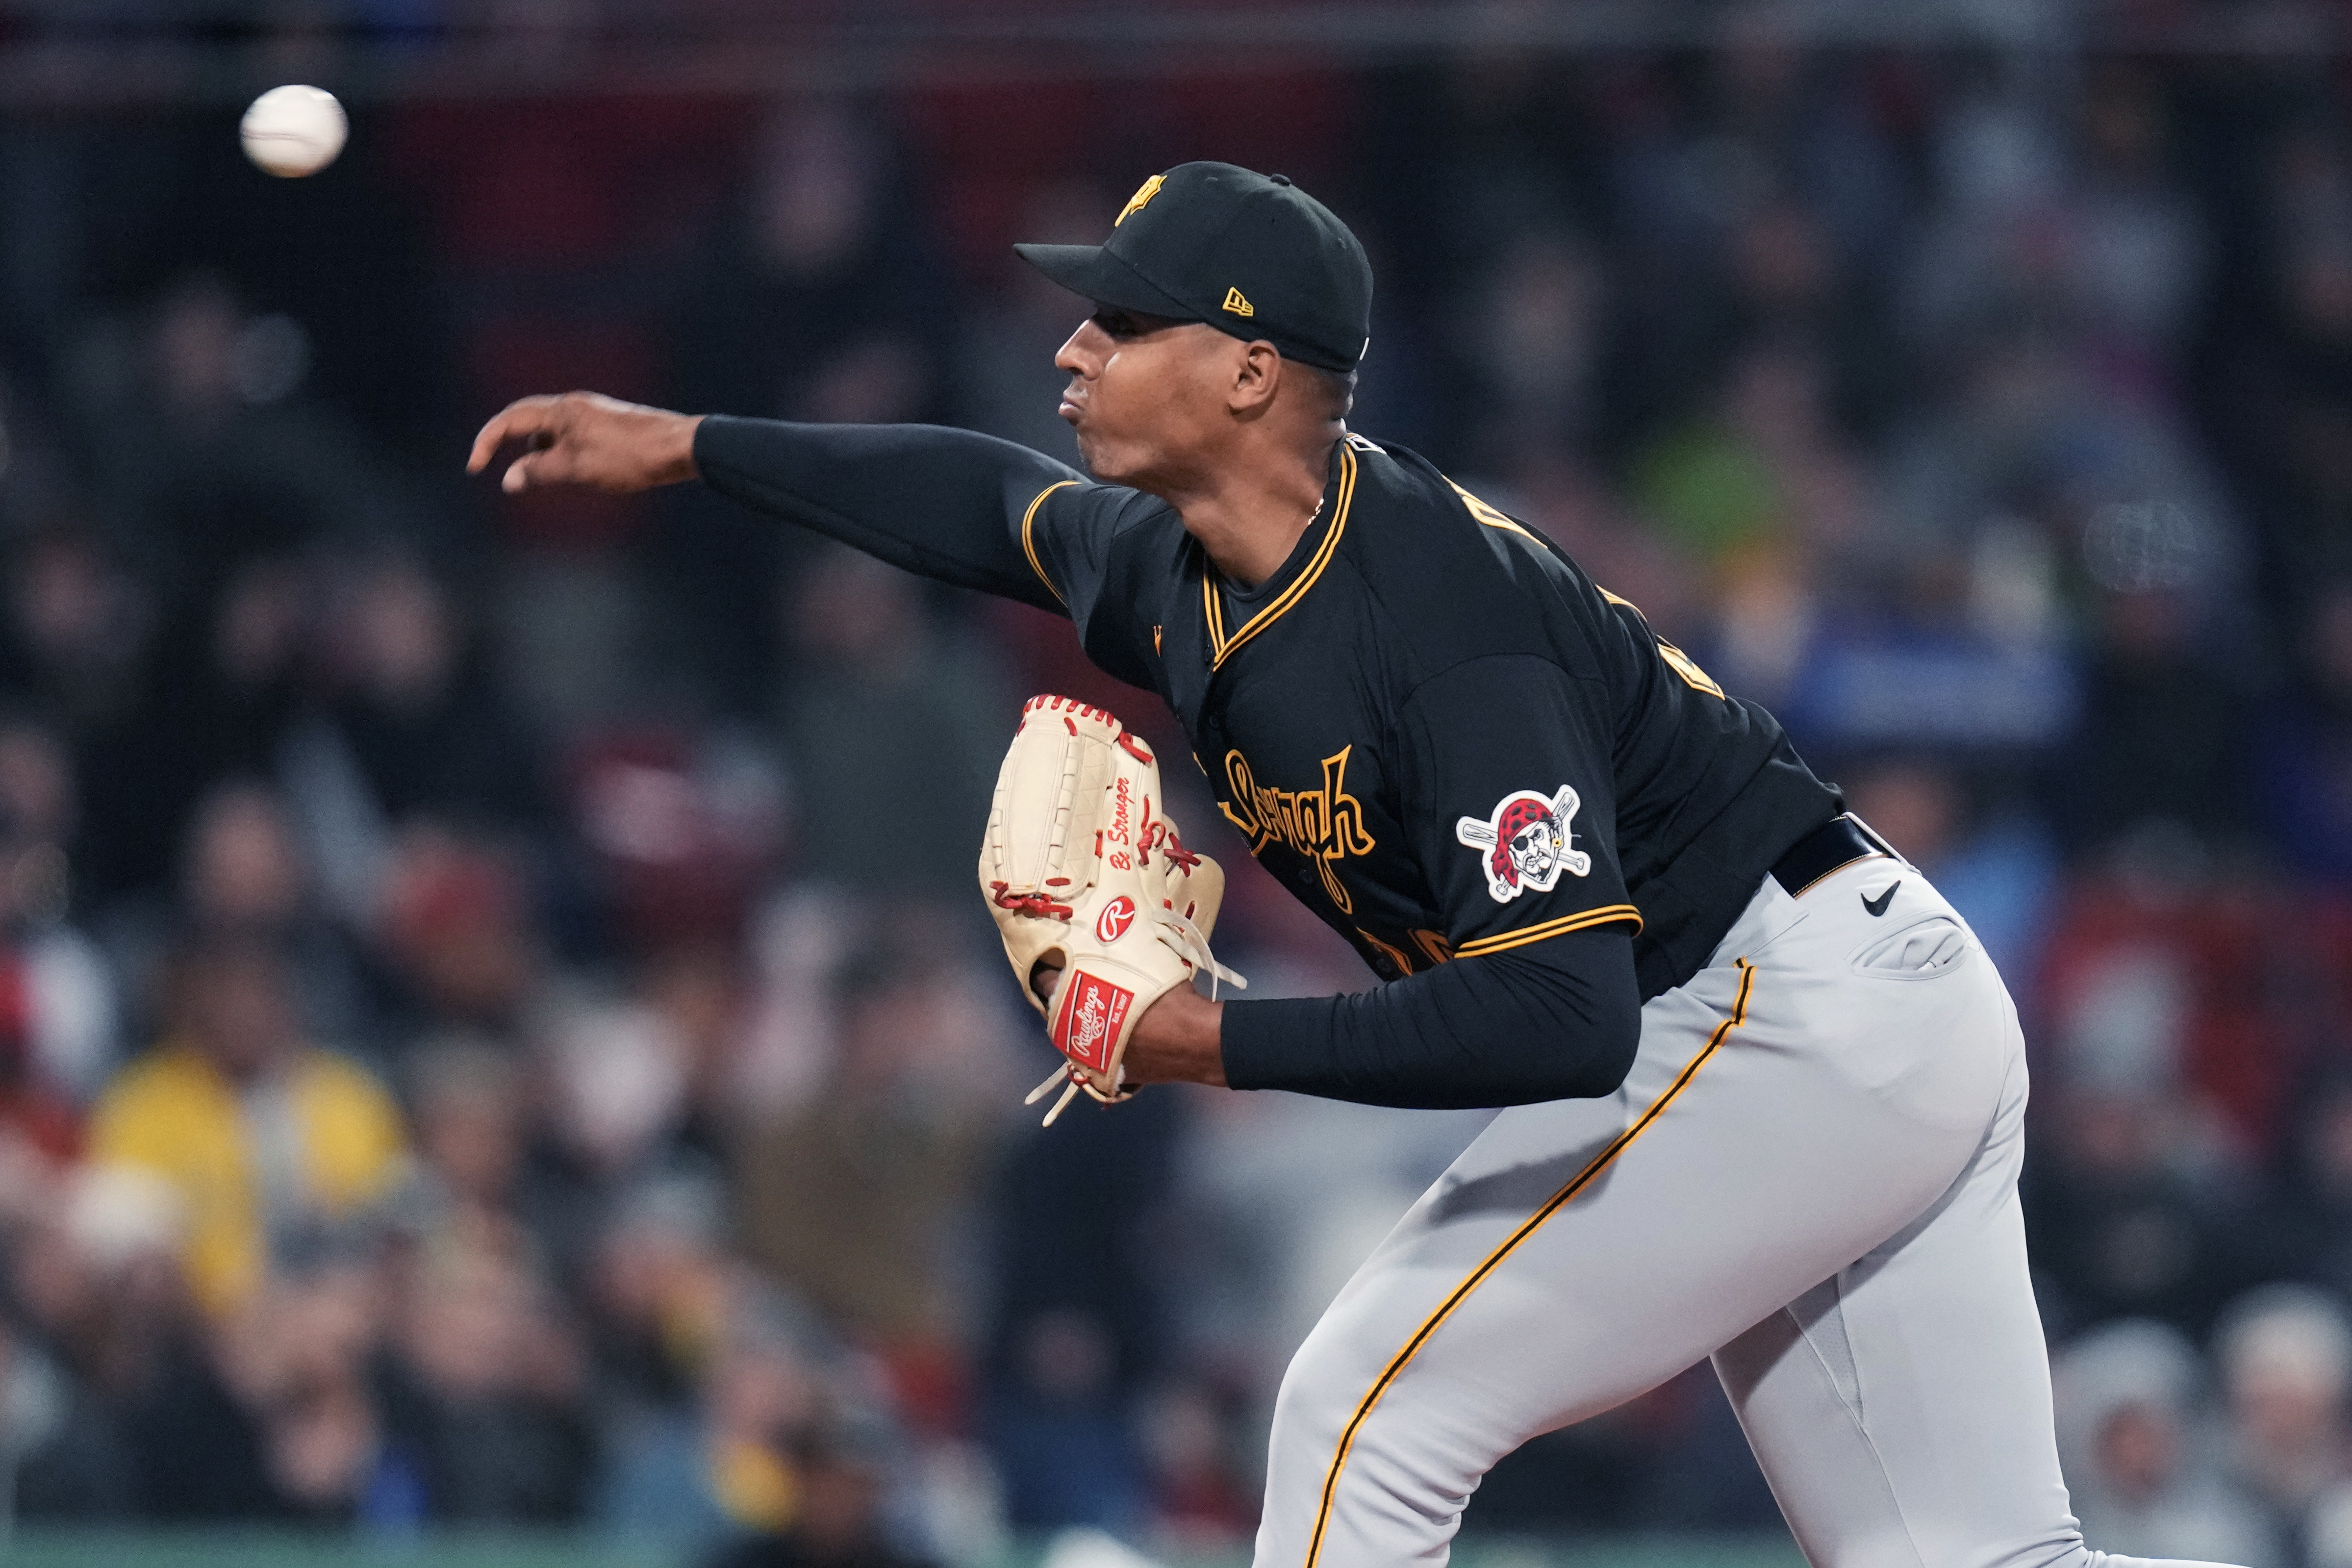 Reynolds, Delay homers help lift Pirates over Red Sox 7-6